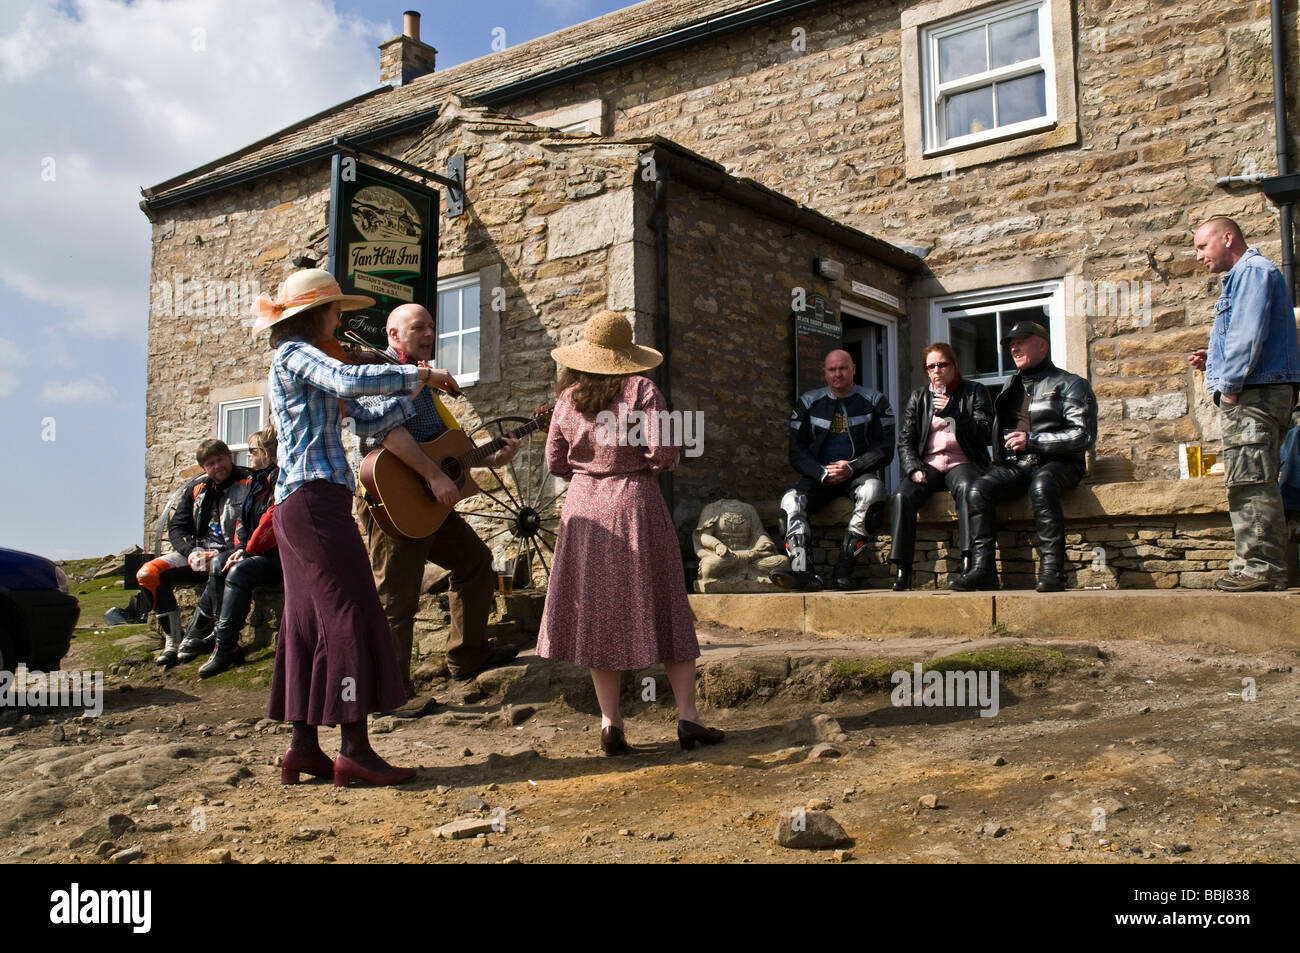 dh Tan Hill Inn TAN HILL NORTH YORKSHIRE Musicians playing outside pub Britain Yorkshire Dales National Park music folk band england uk people Stock Photo